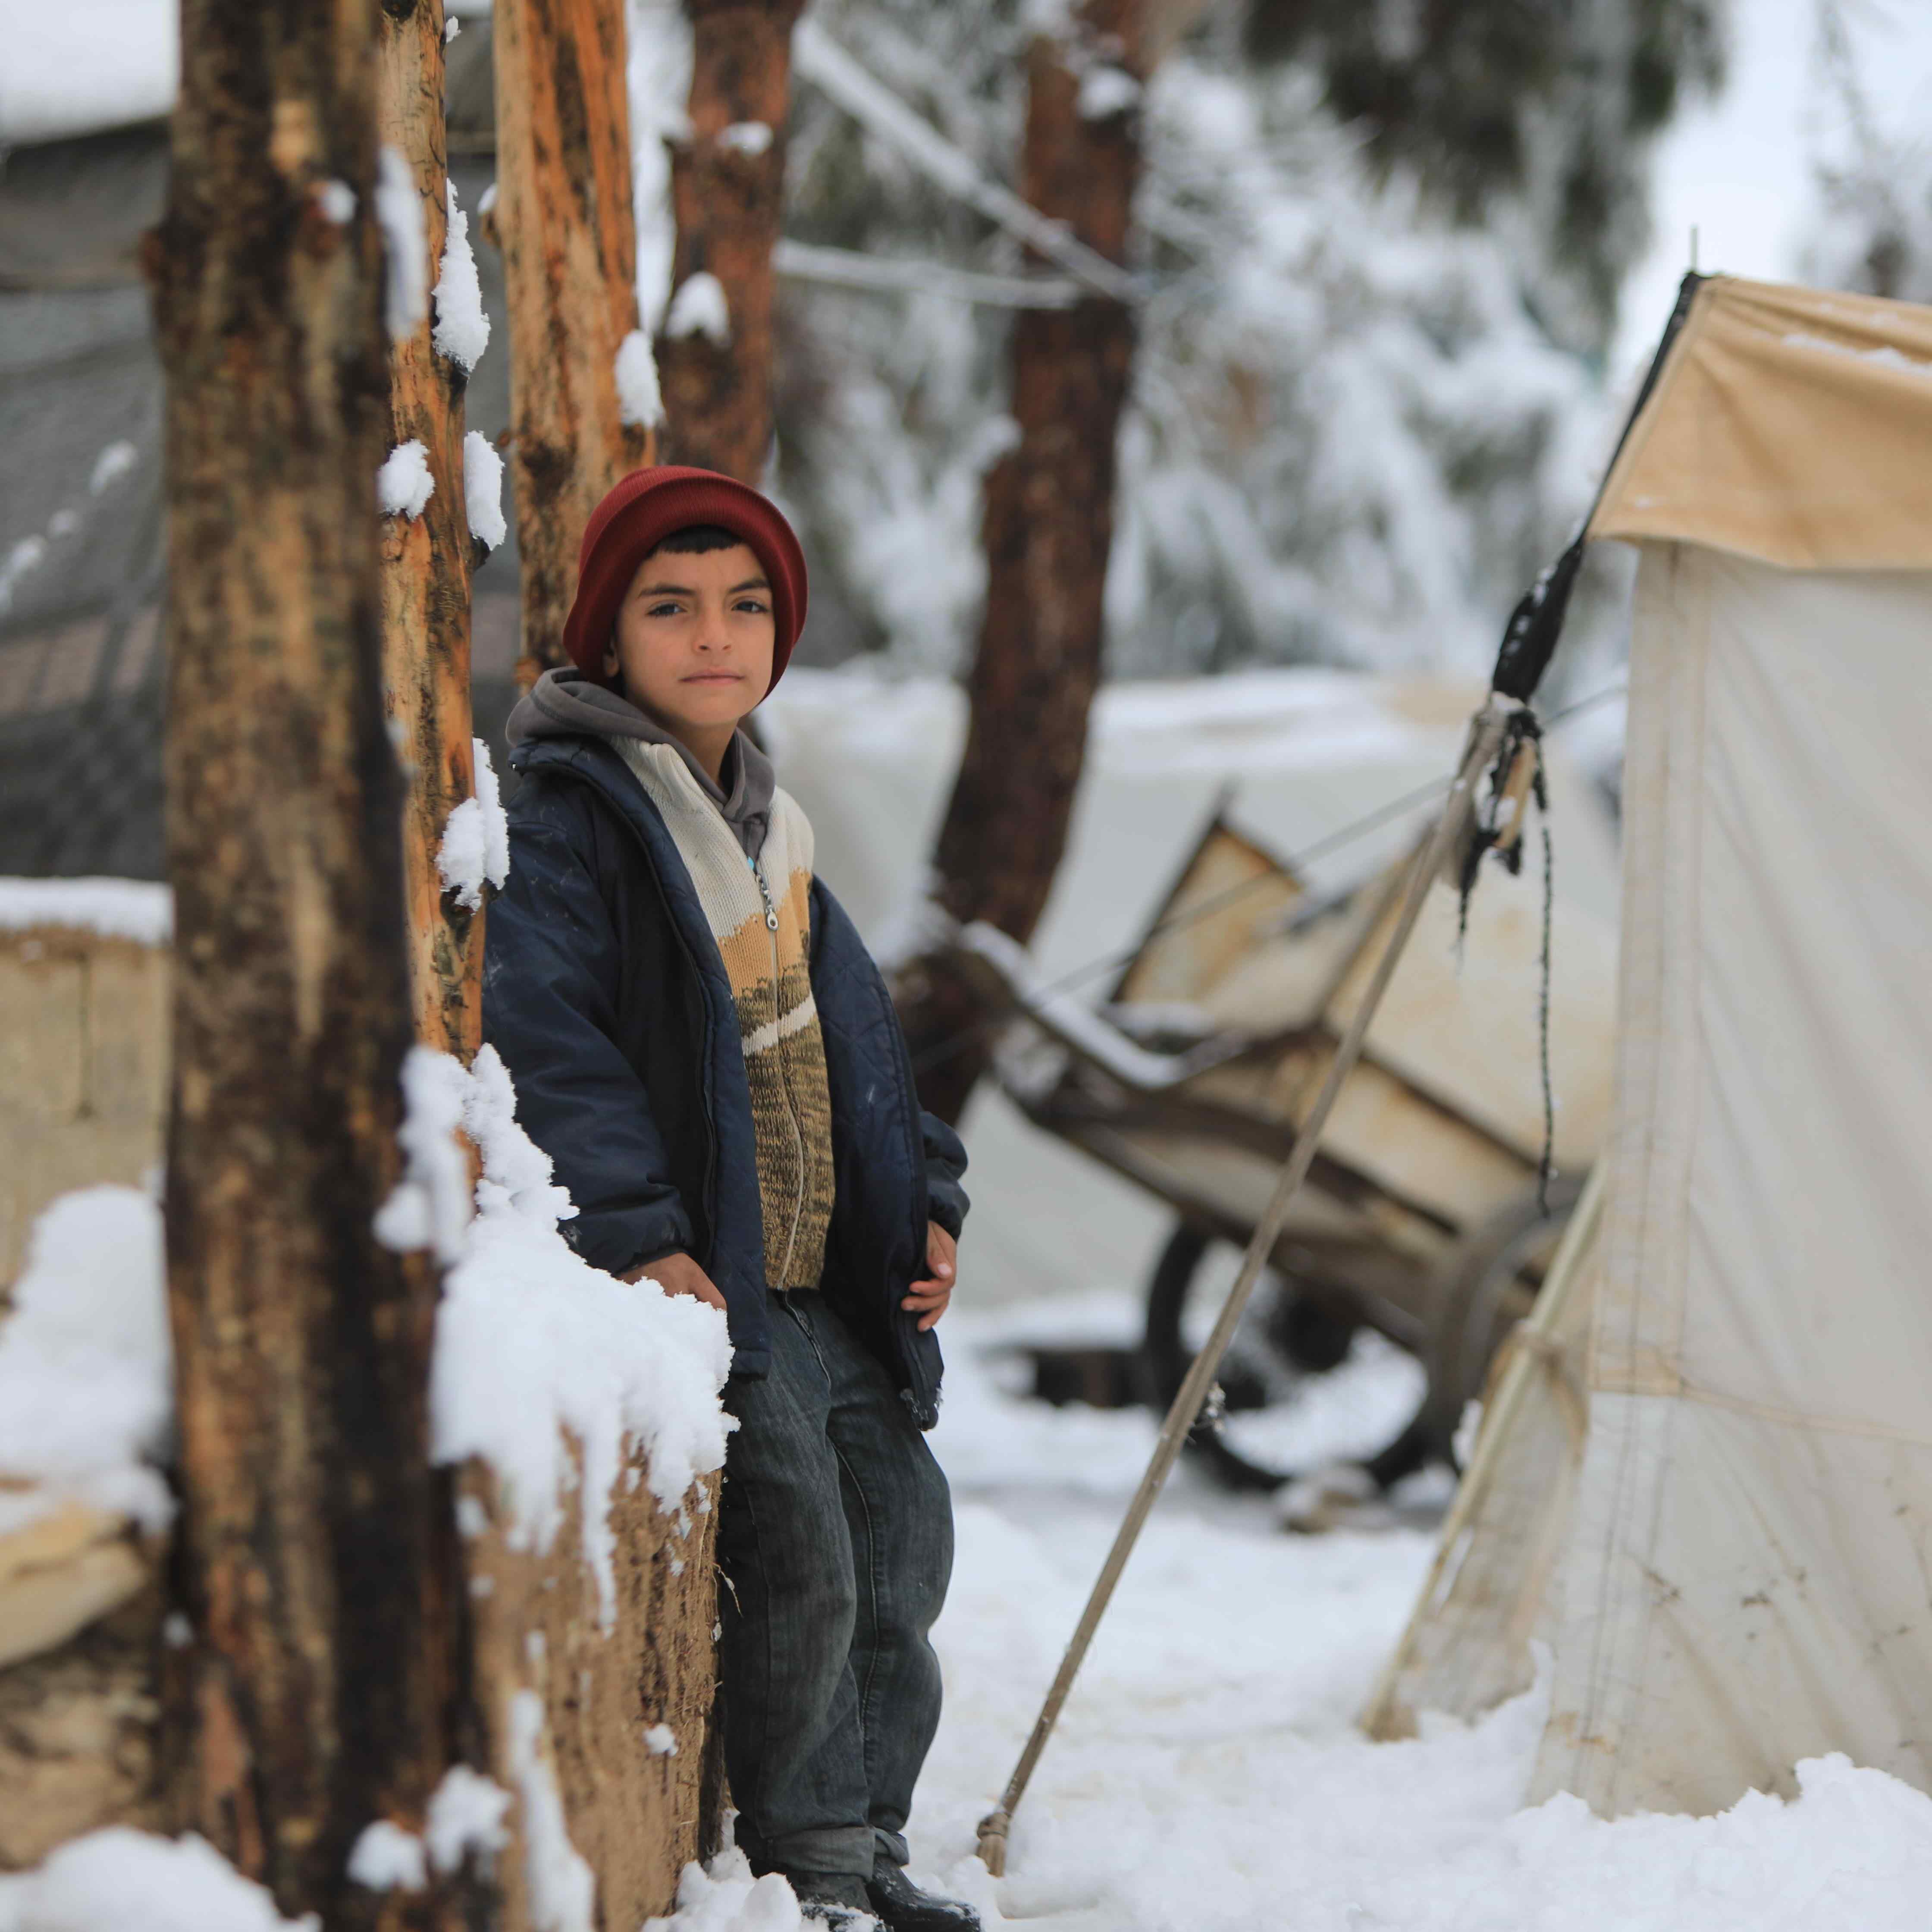 Syrian refugees' struggle for survival amid freezing cold at camps